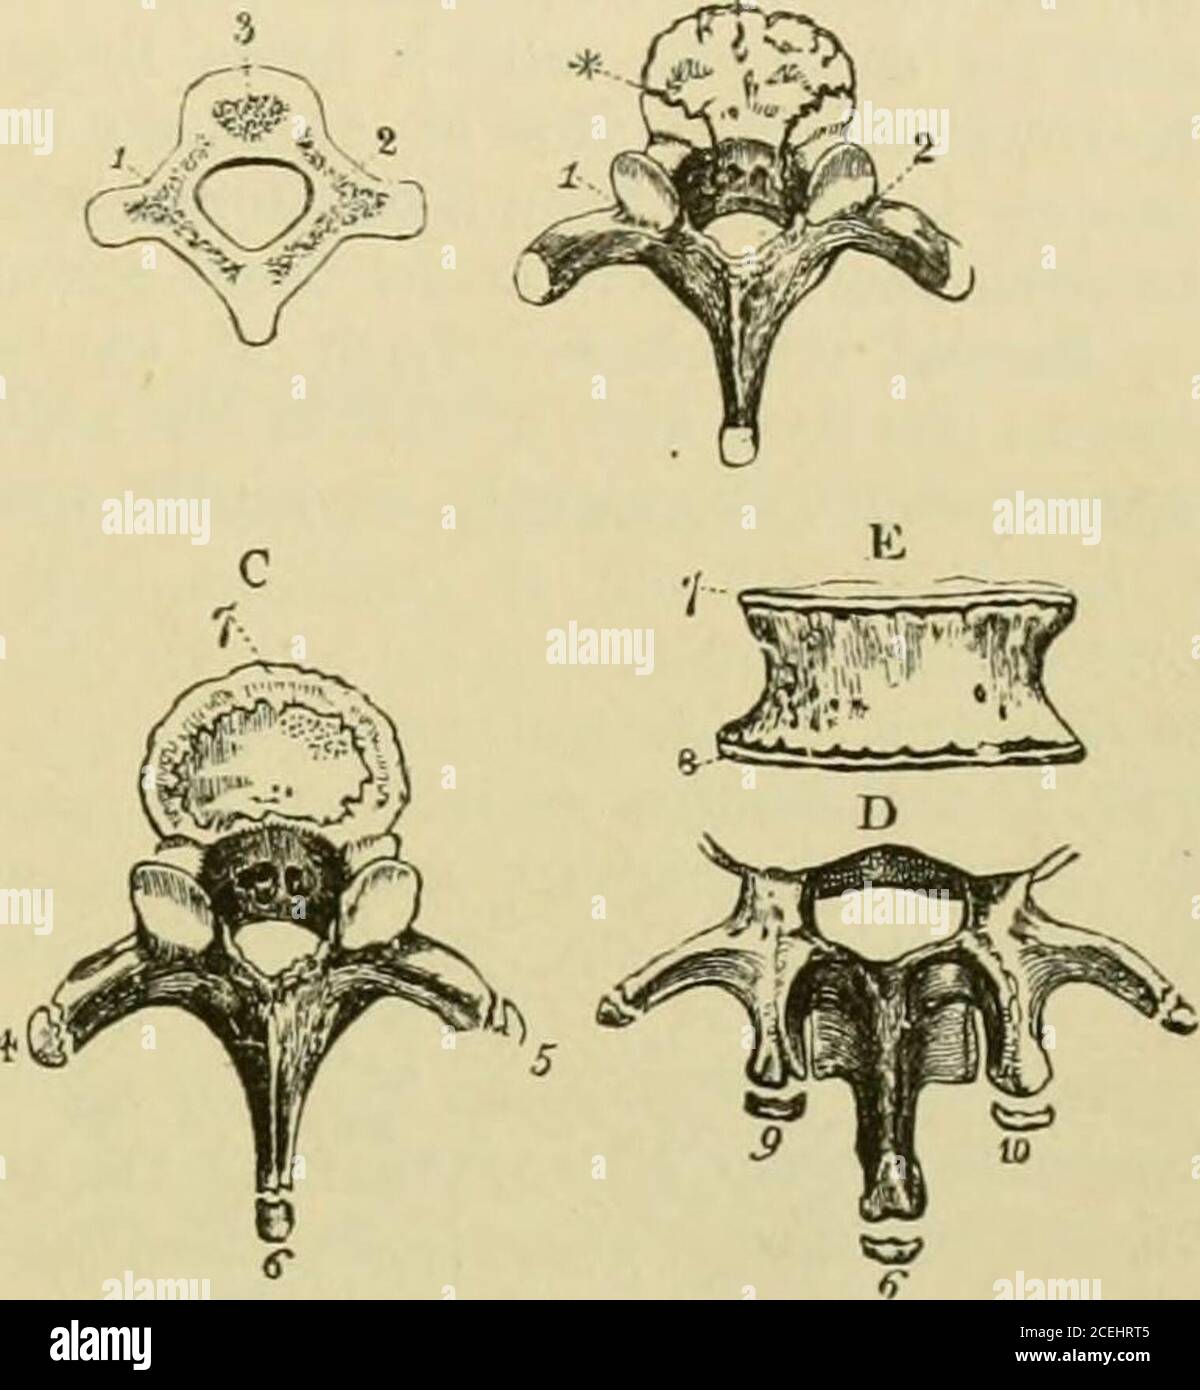 . Quain's Elements of anatomy. responding tothe three original centres. In the first year of infancy the laminas of opposite sides becomeunited in a number of the vertebras, but not in all. The spinous processes, remaining Fig. 19. -Ossification of the vertebrje.(R. Quain.) 1, A, fietal vertebra, showing the three primary centres ;2, neural ossitications ; 3, ceutral ossification. B, dorsal vertebra from a child of two years ; 1 & 2are seen to have encroached upon the body at * theneiiro-central synchondrosis, to have extended into thearticular and transverse processes, and to have unitedbehin Stock Photo